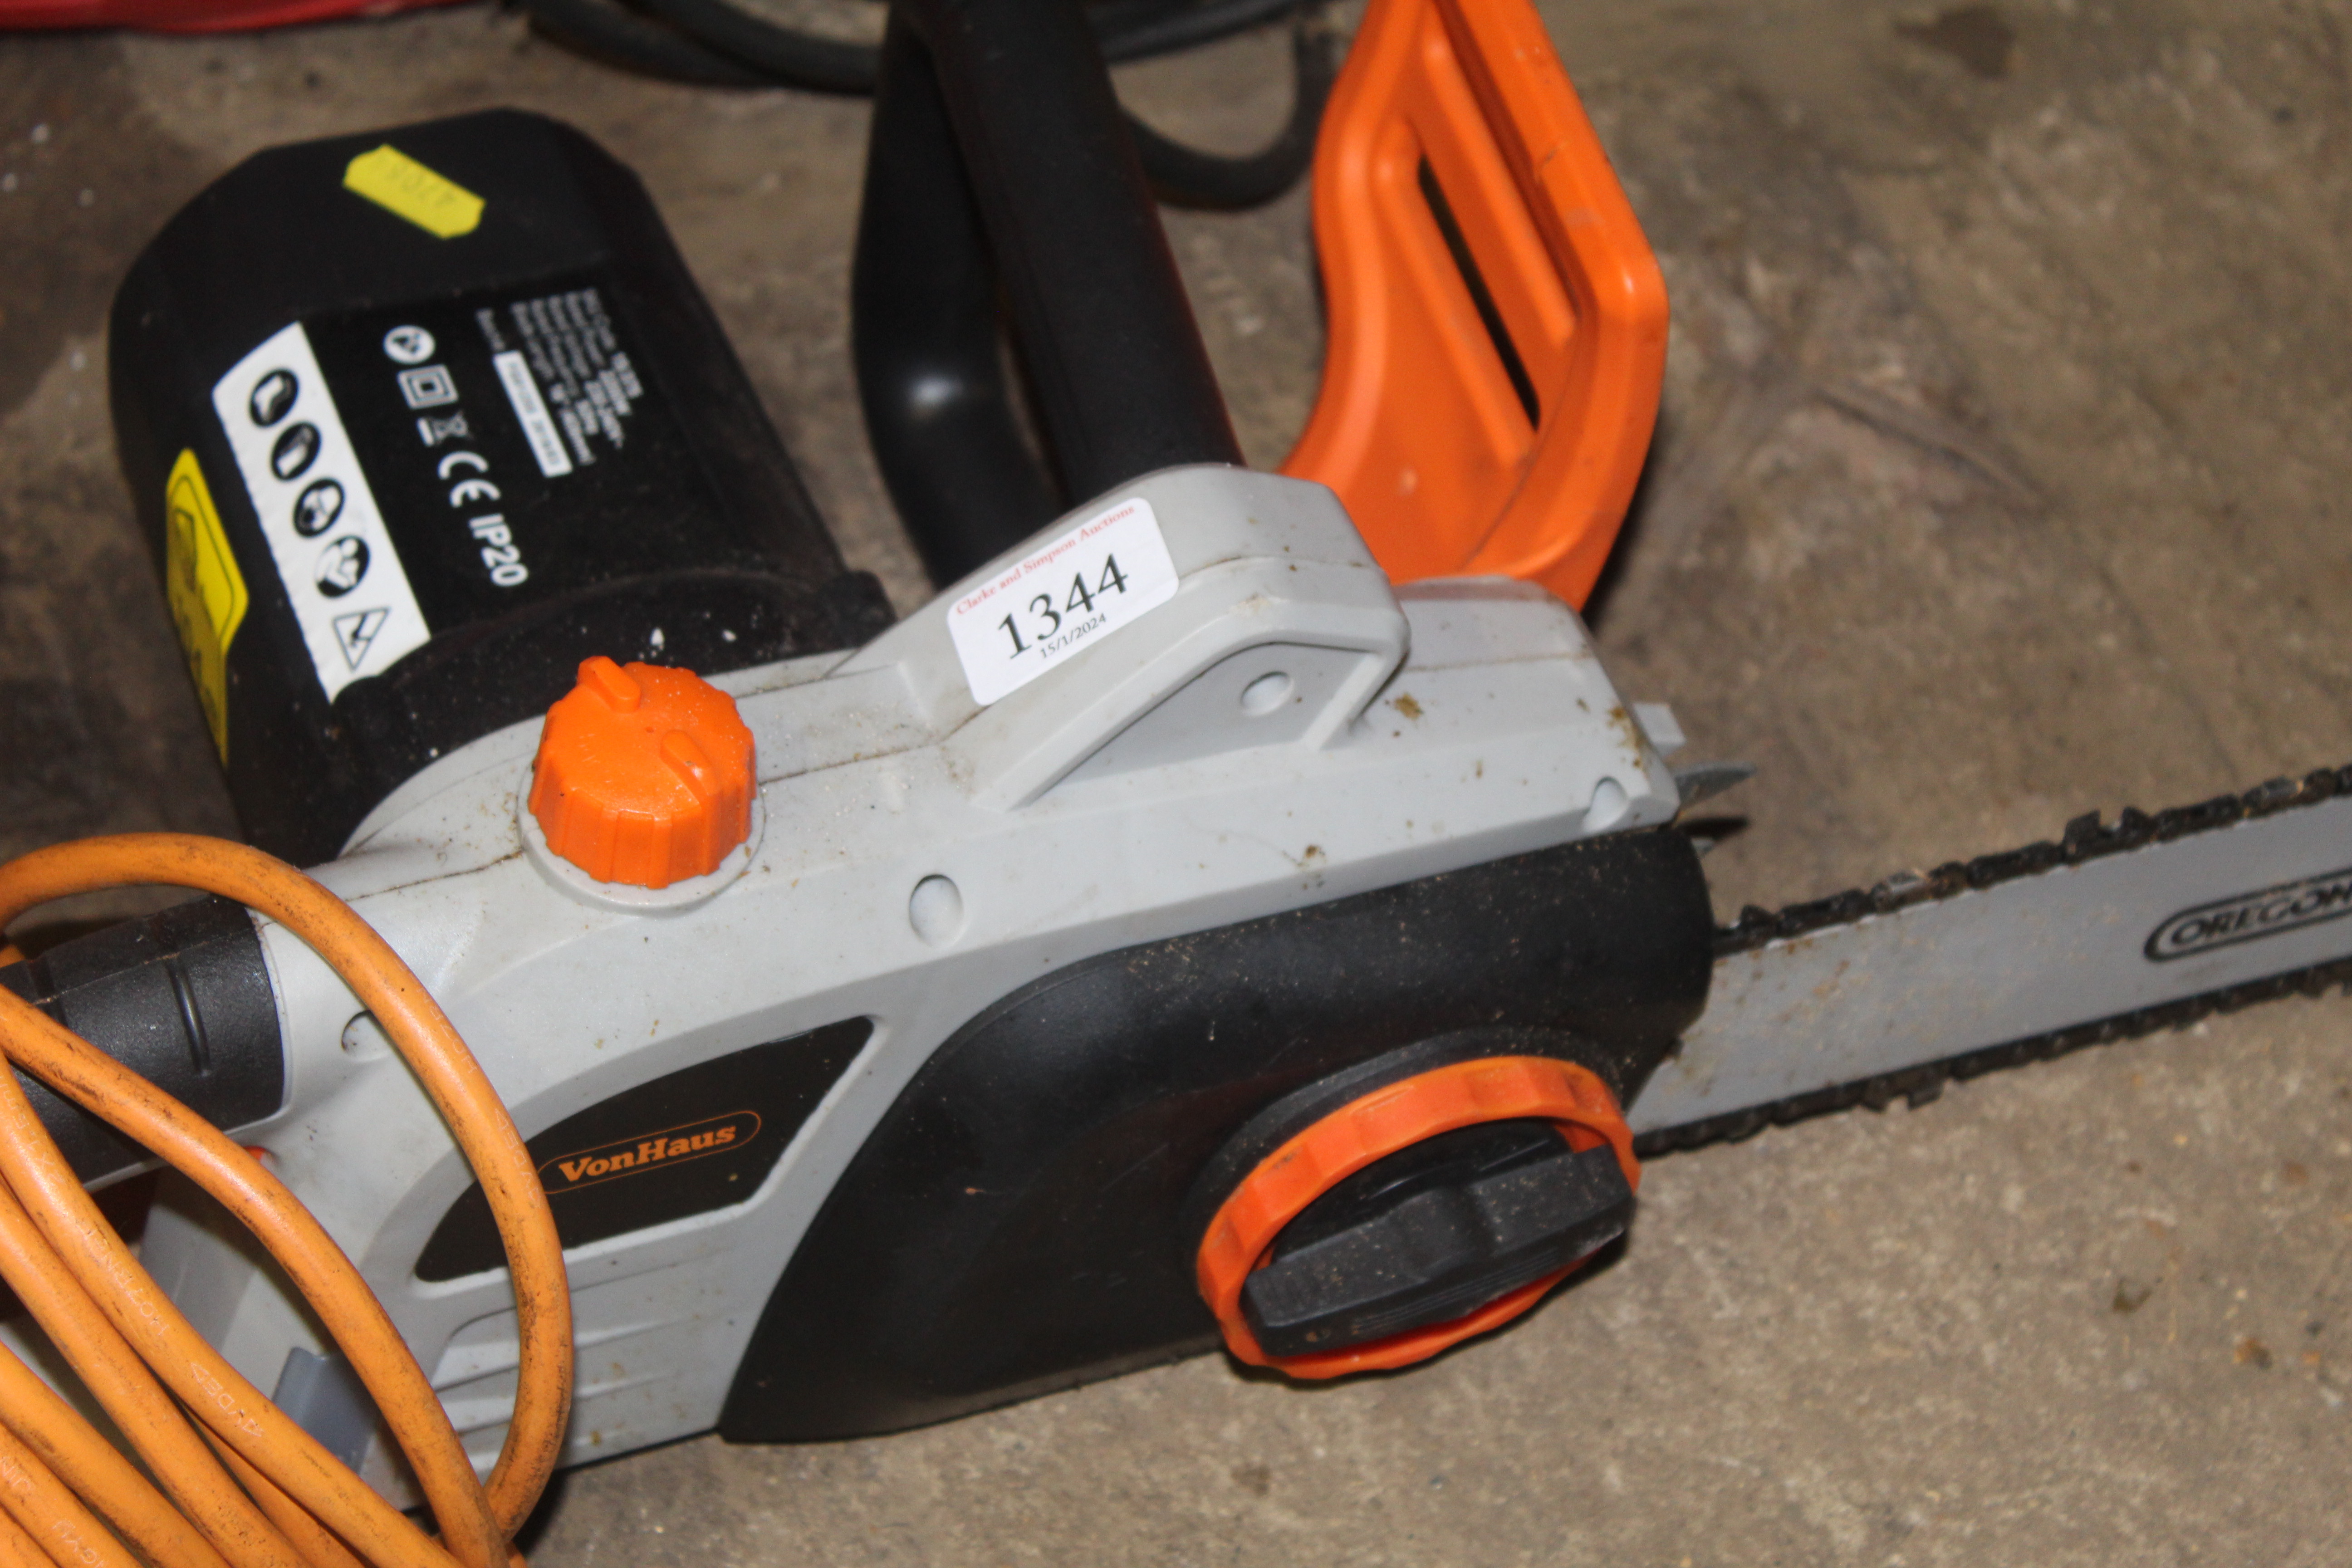 A VonHuas electric chainsaw - Image 2 of 2